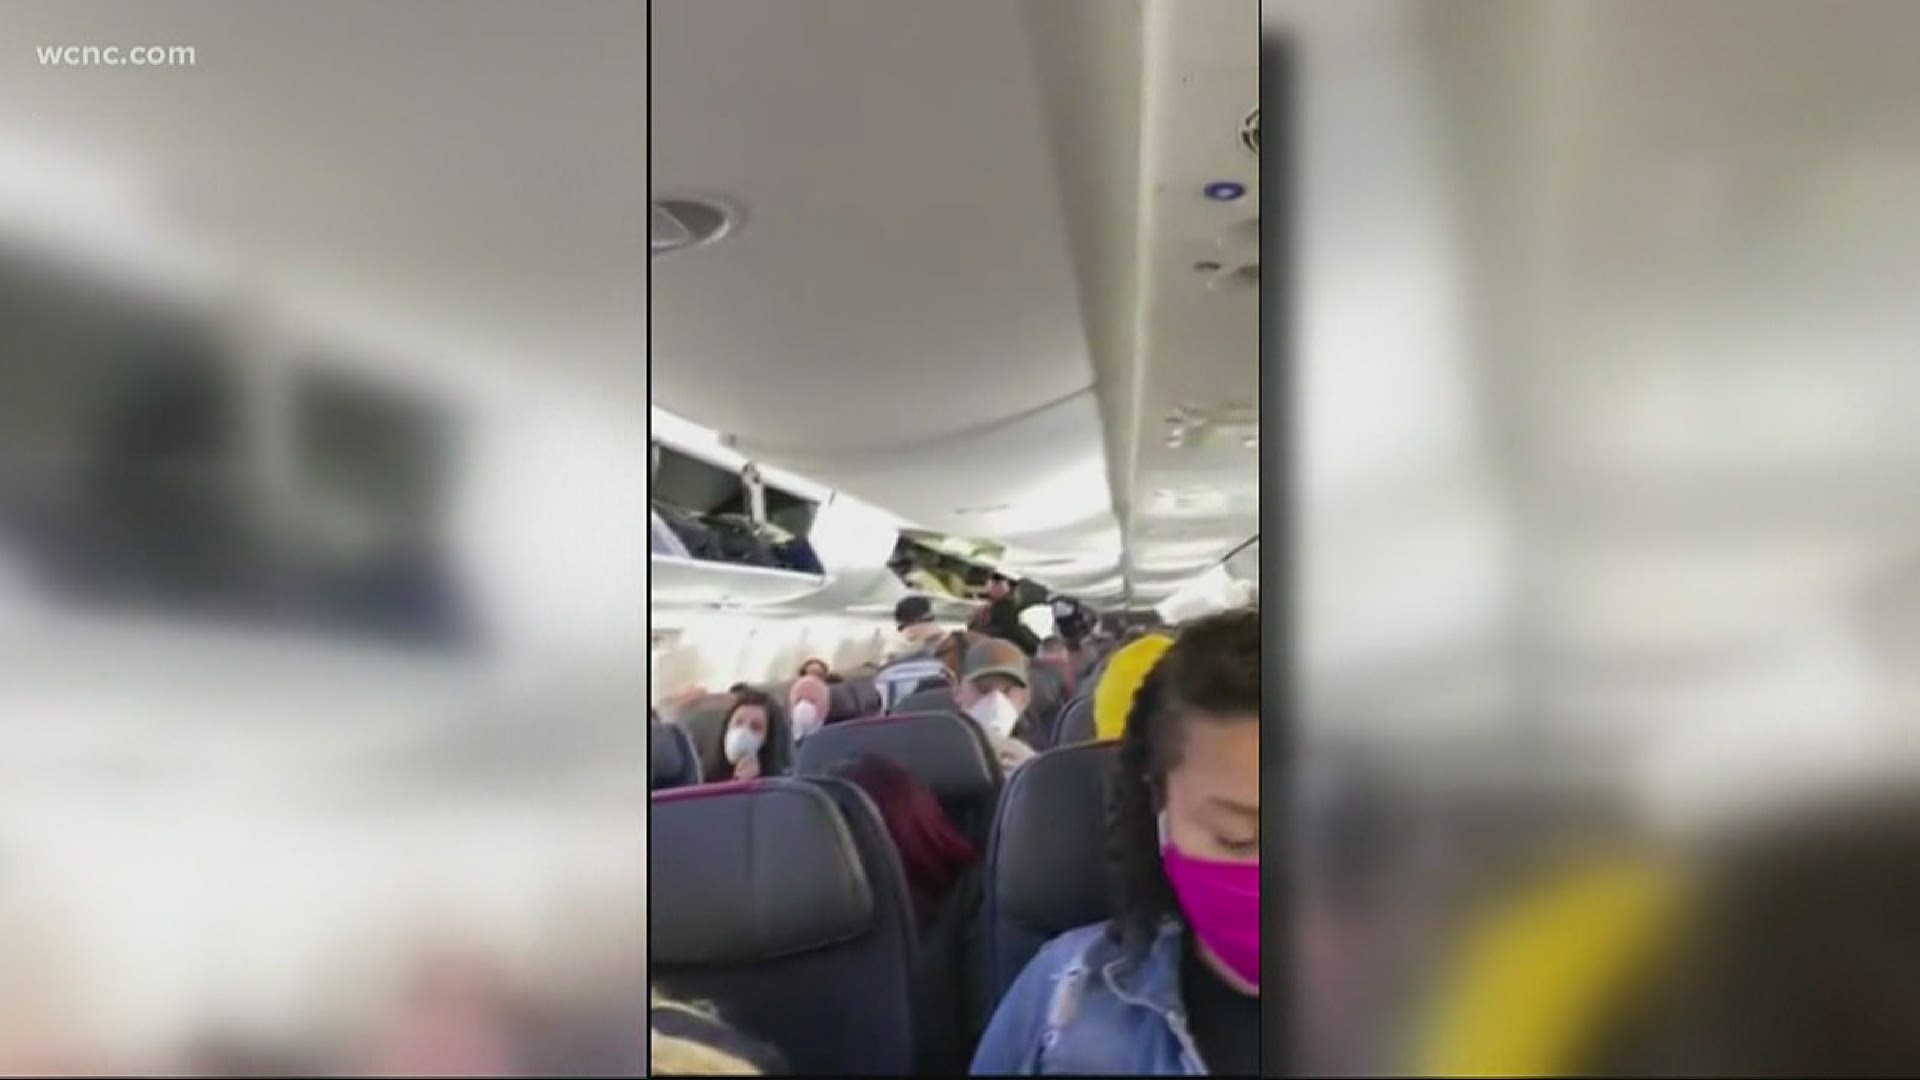 Social distancing was not an option on this flight from New York City to Charlotte. We speak with the woman who sent out the video warning others not to travel.